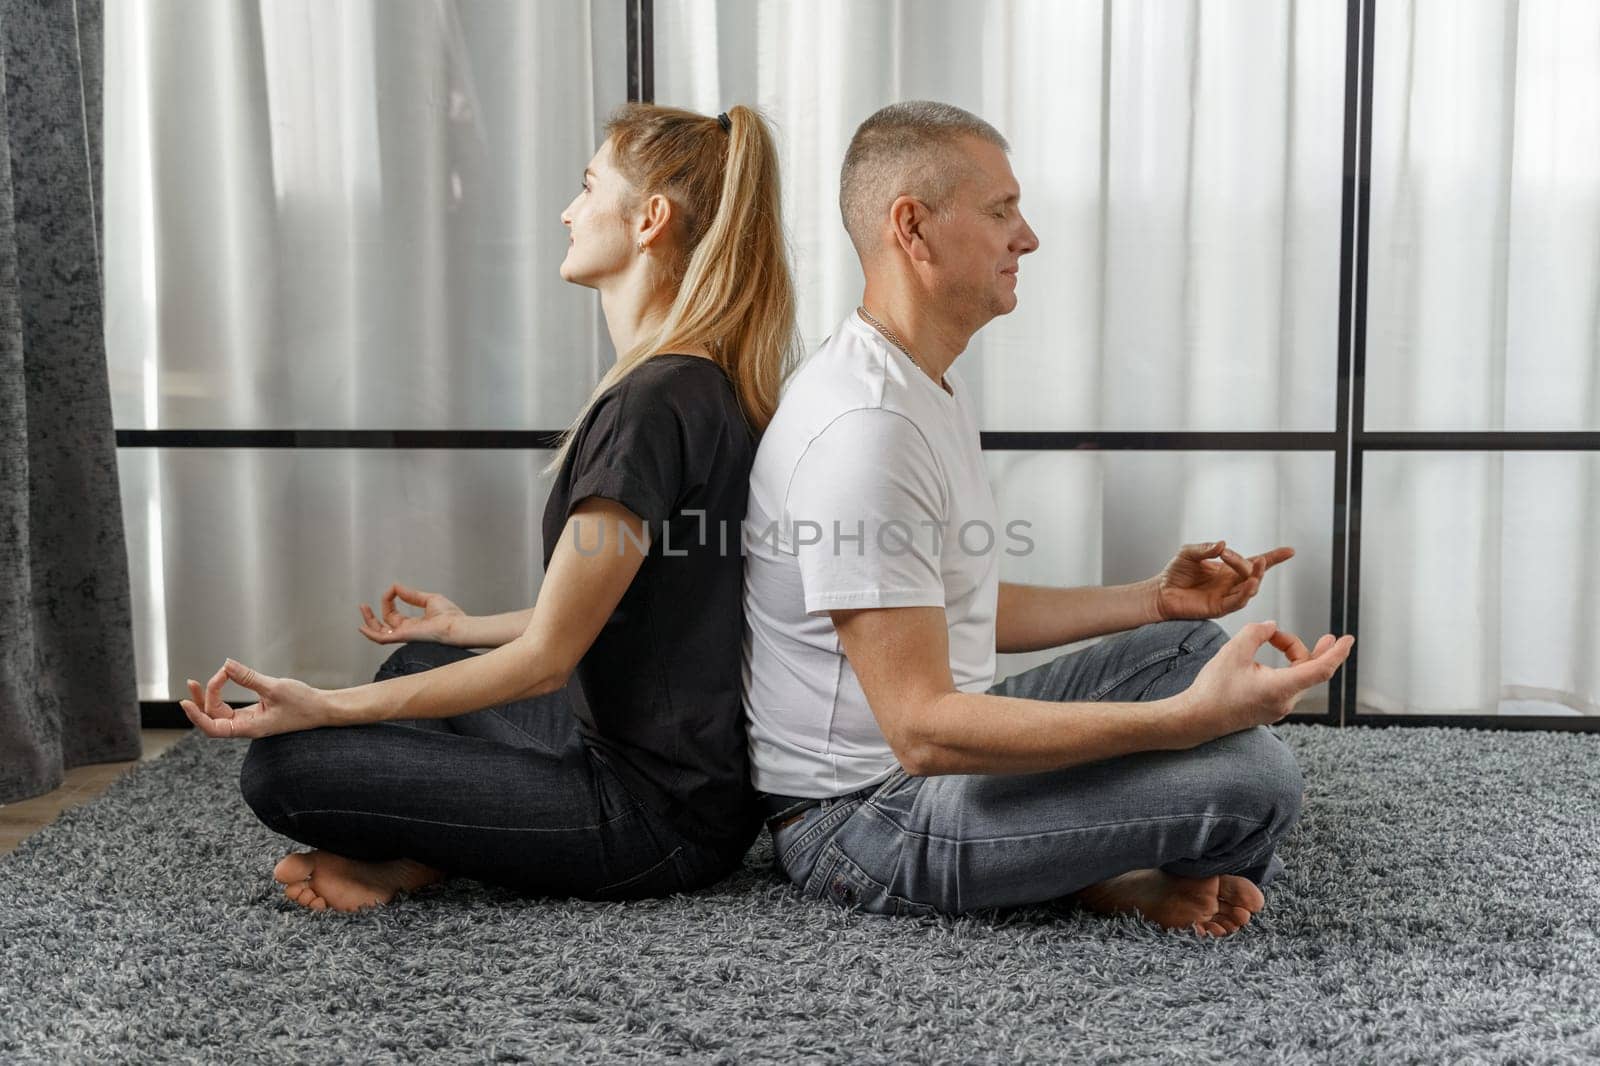 A man and a woman sit back to back, practice yoga and meditate for relaxation and balance of life in a room at home. Sports concept.